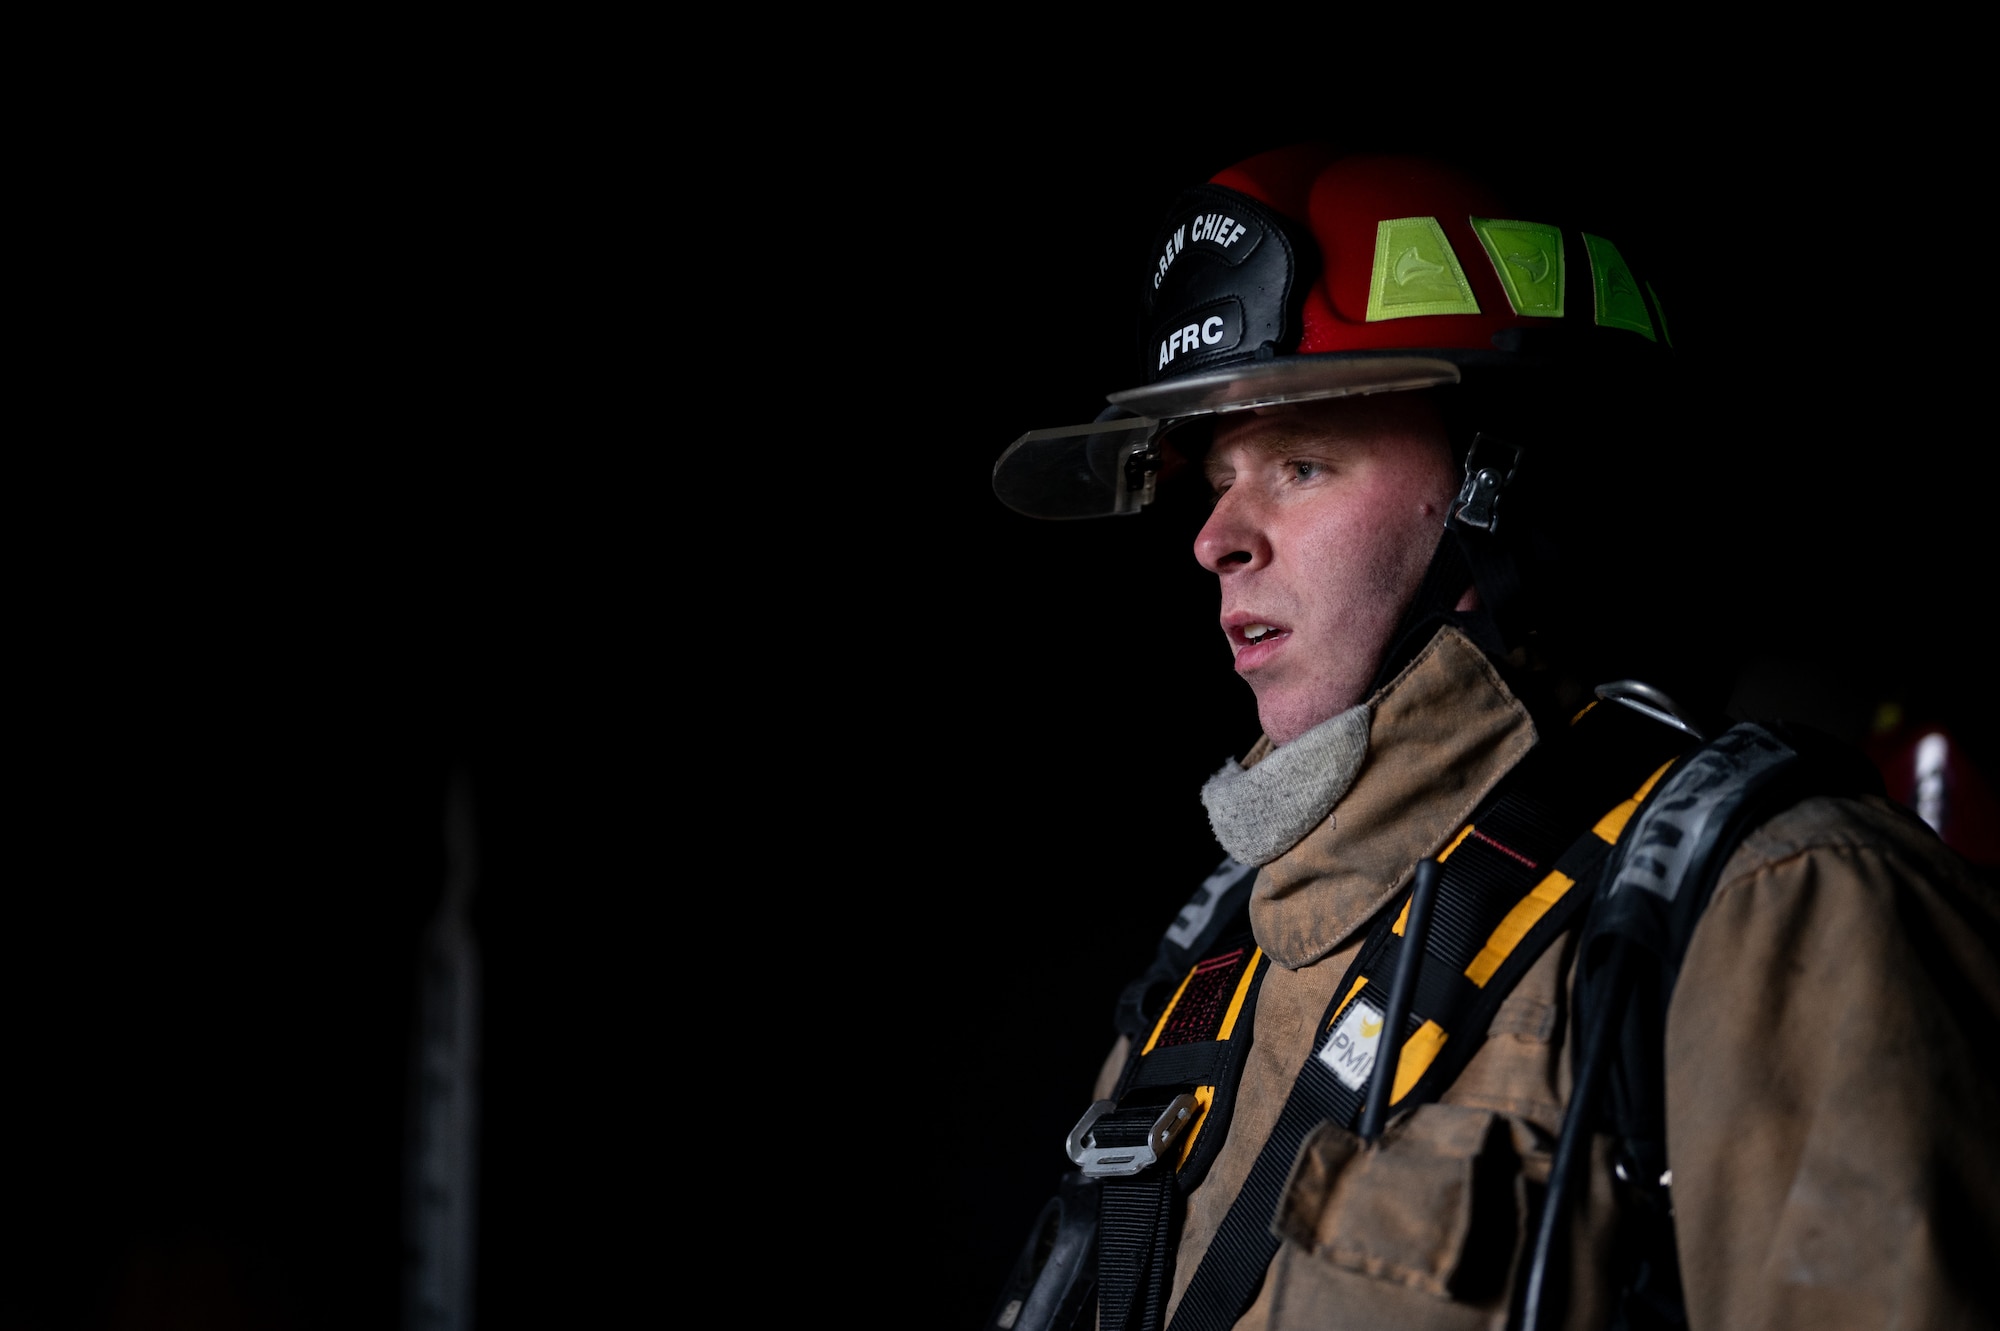 A uniformed firefighter looking to the left of the frame. Only he is visible, the background is all black.